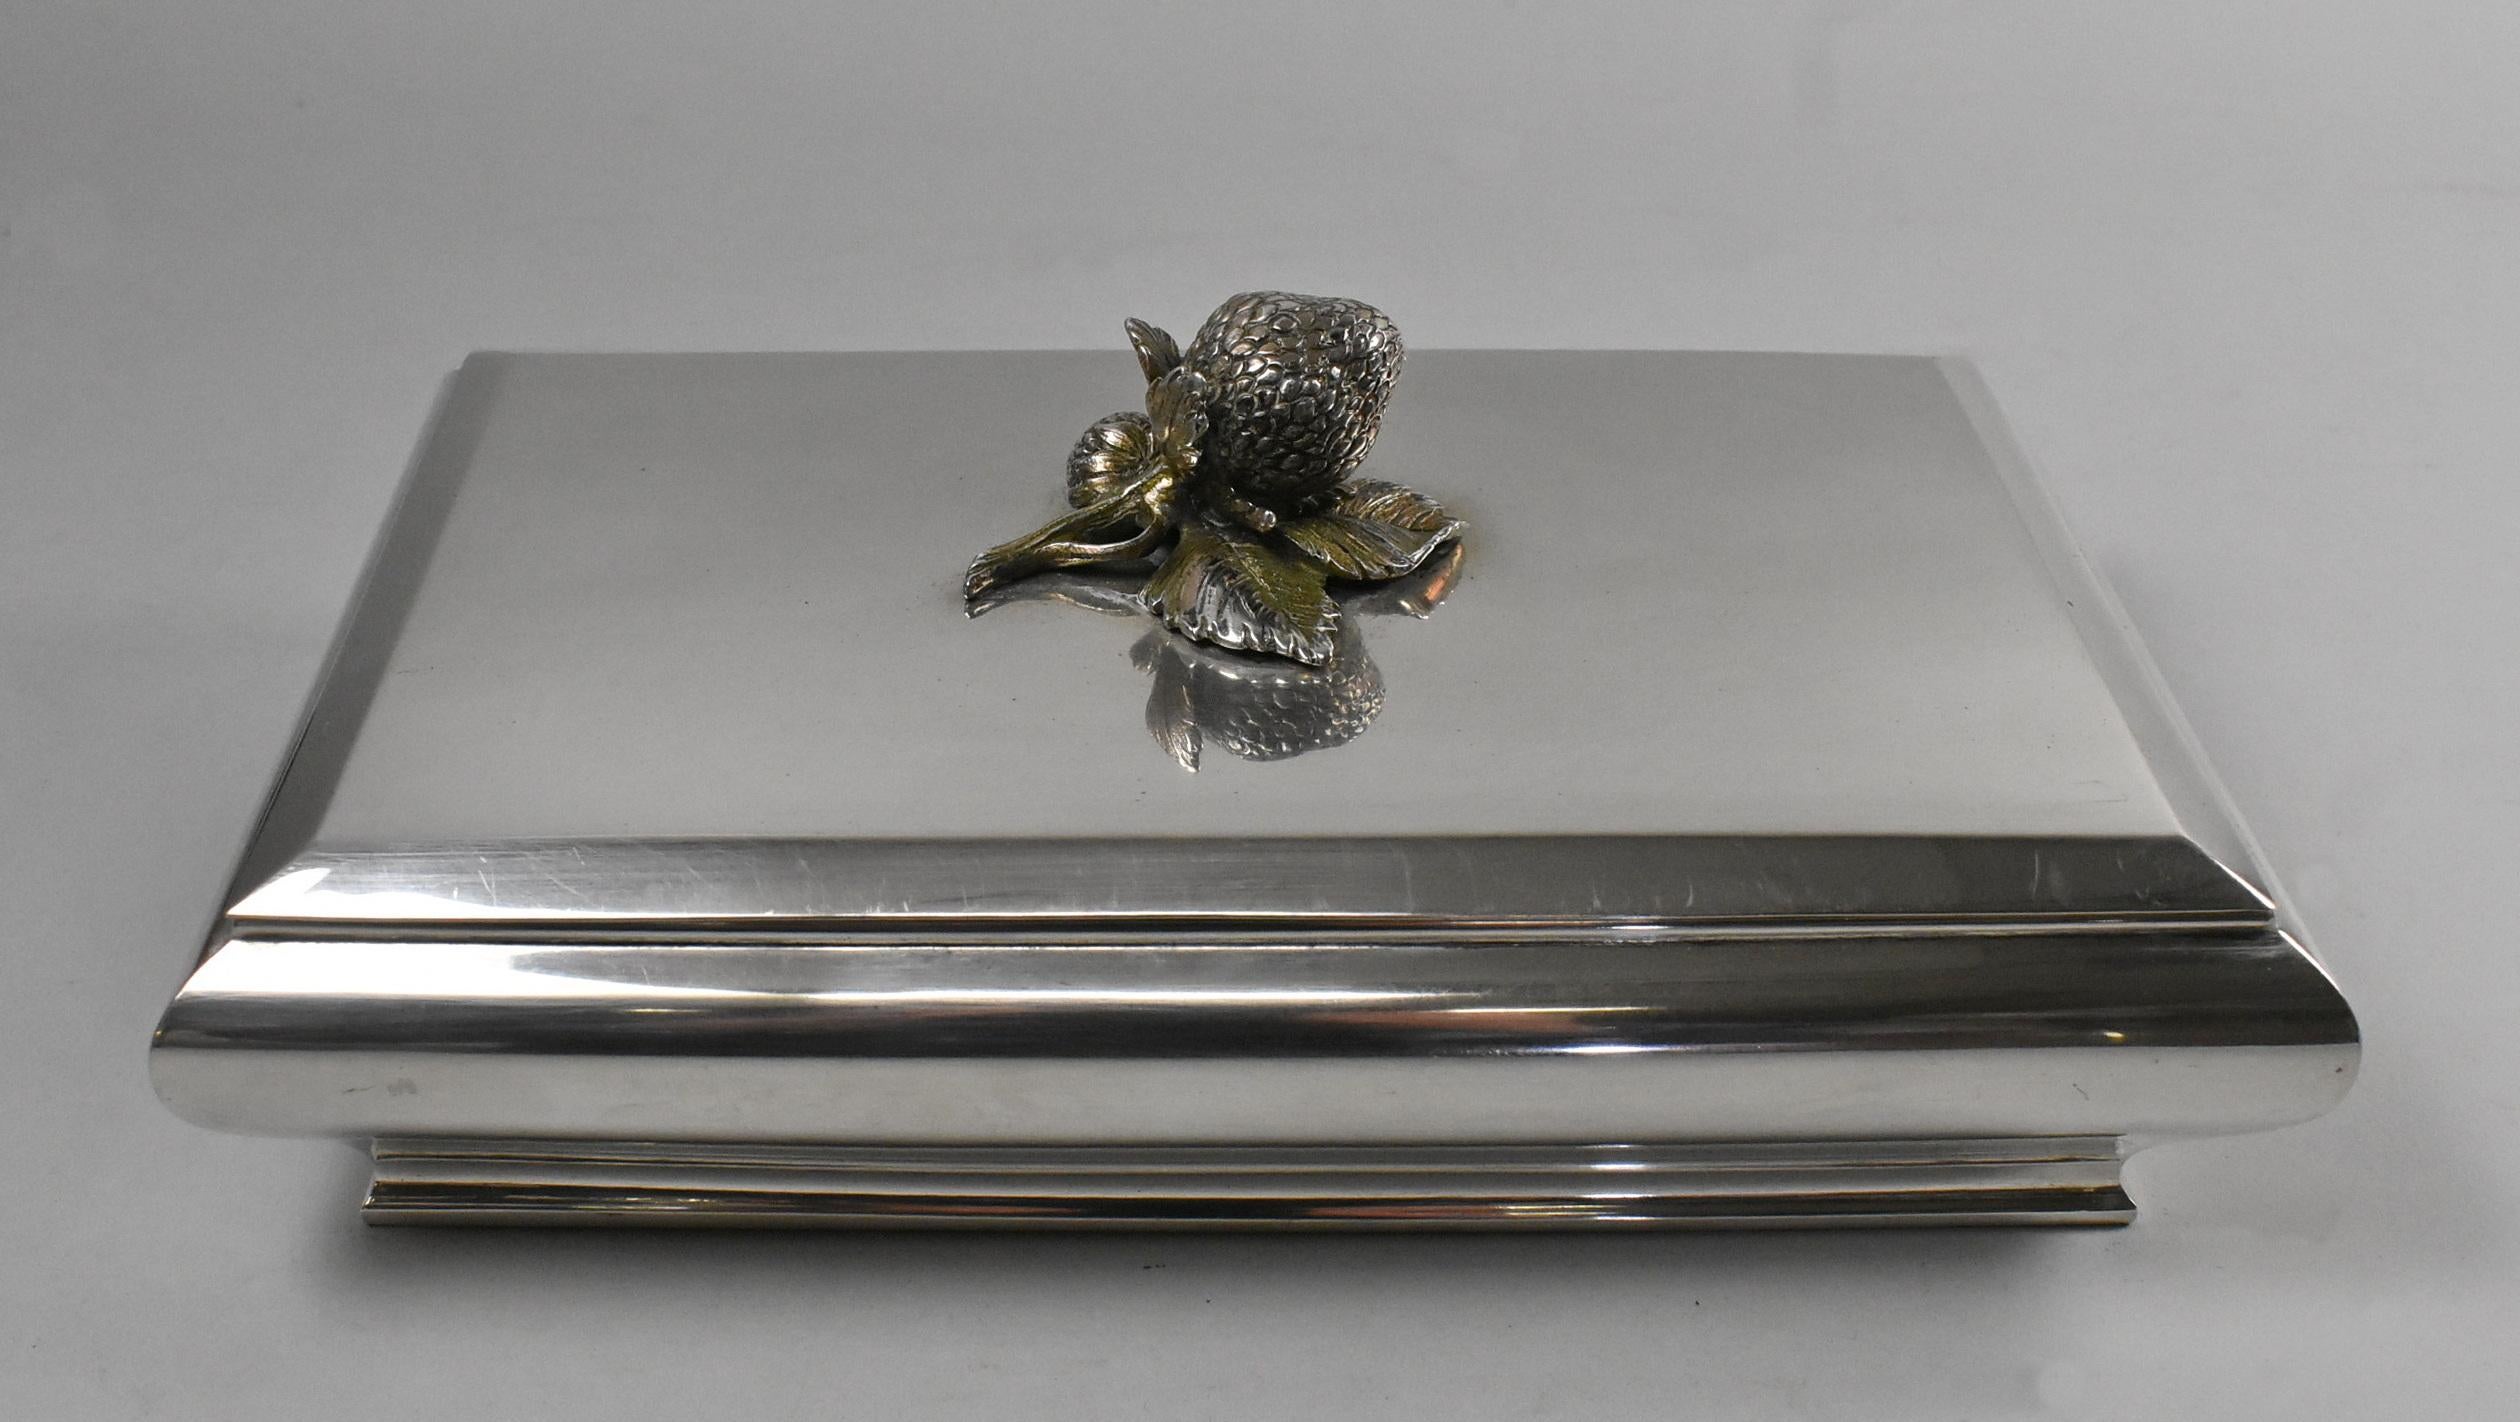 Silver 800 strawberry lidded vanity box. 1090.6 grams in weight. Very light scratches to surface. Dimensions: 6.25